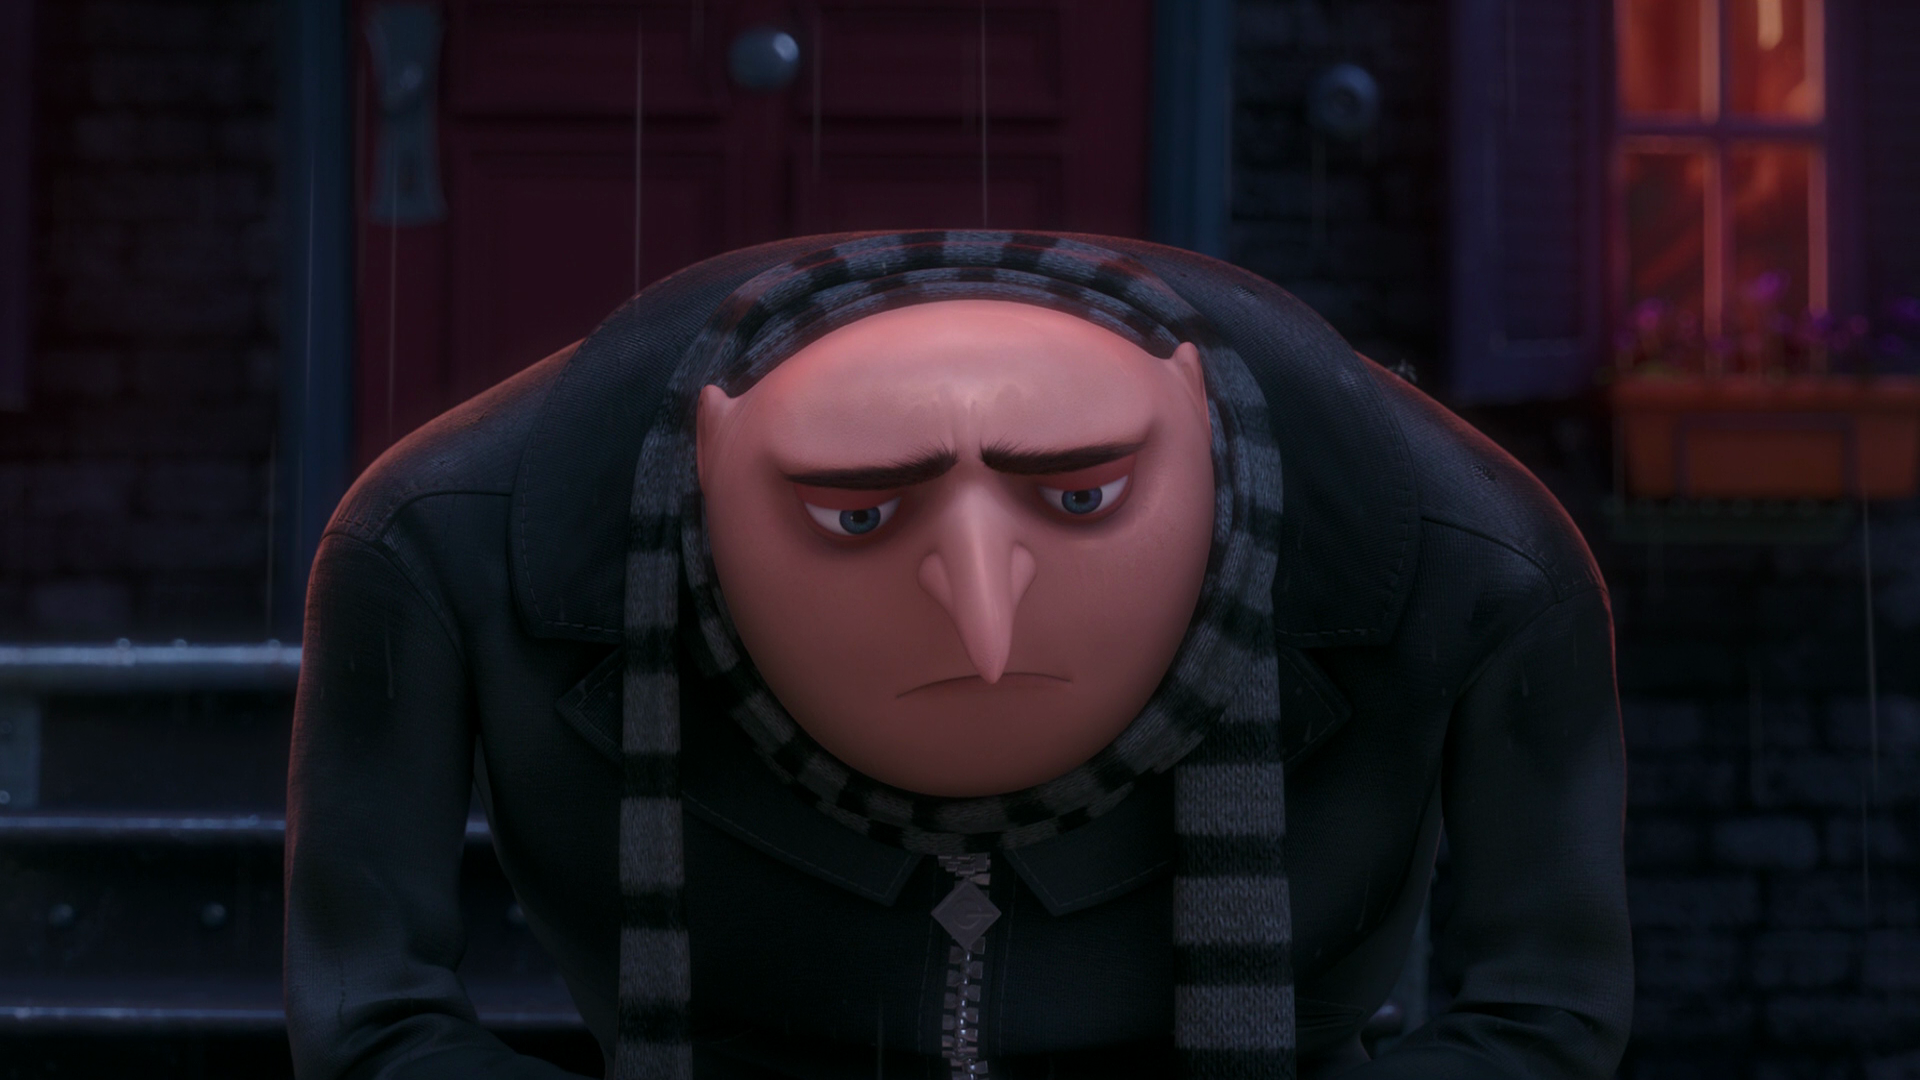 Despicable Me 2 instal the new for android